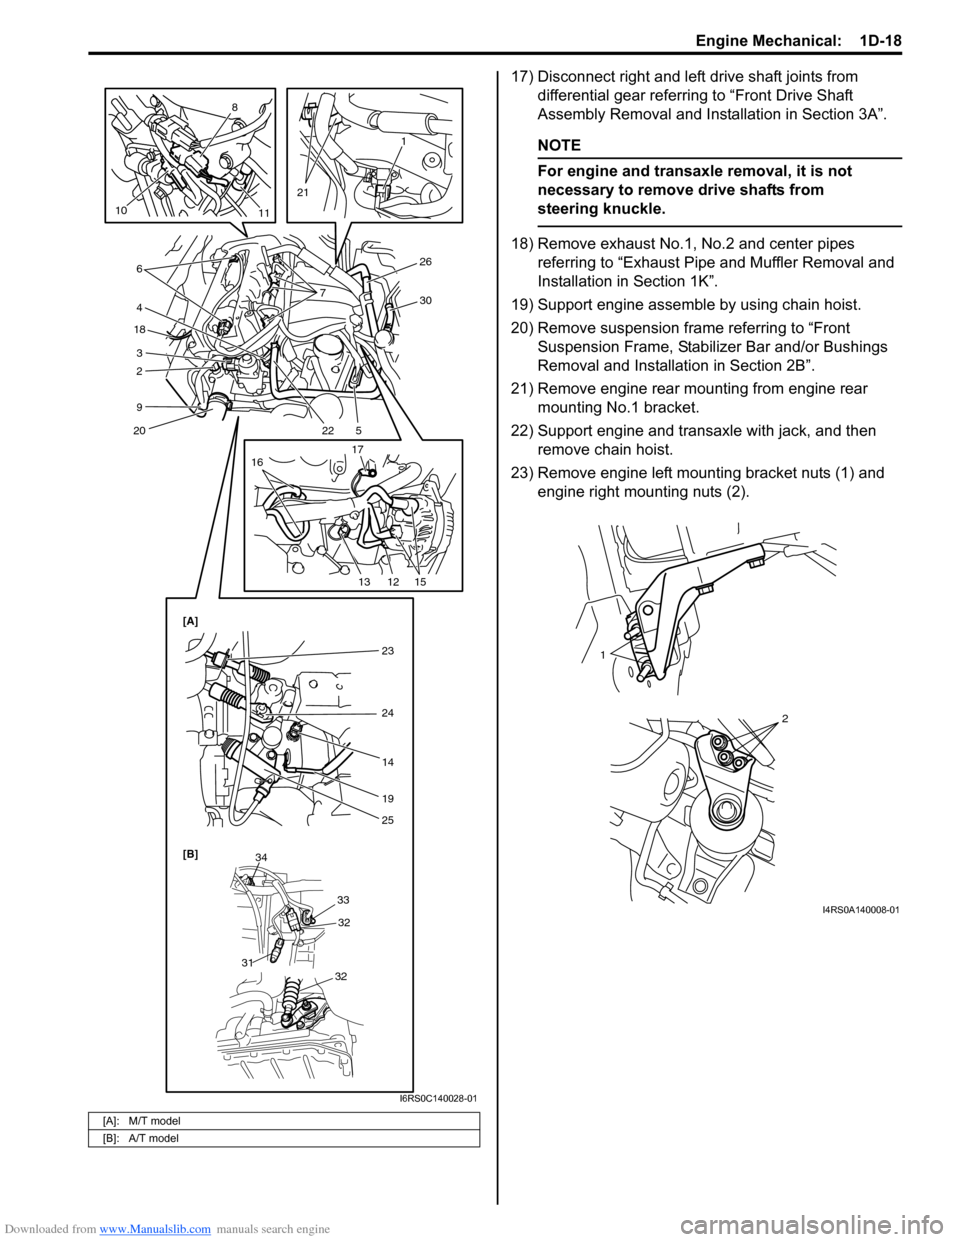 SUZUKI SWIFT 2005 2.G Service Workshop Manual Downloaded from www.Manualslib.com manuals search engine Engine Mechanical:  1D-18
17) Disconnect right and left drive shaft joints from differential gear referring to “Front Drive Shaft 
Assembly R